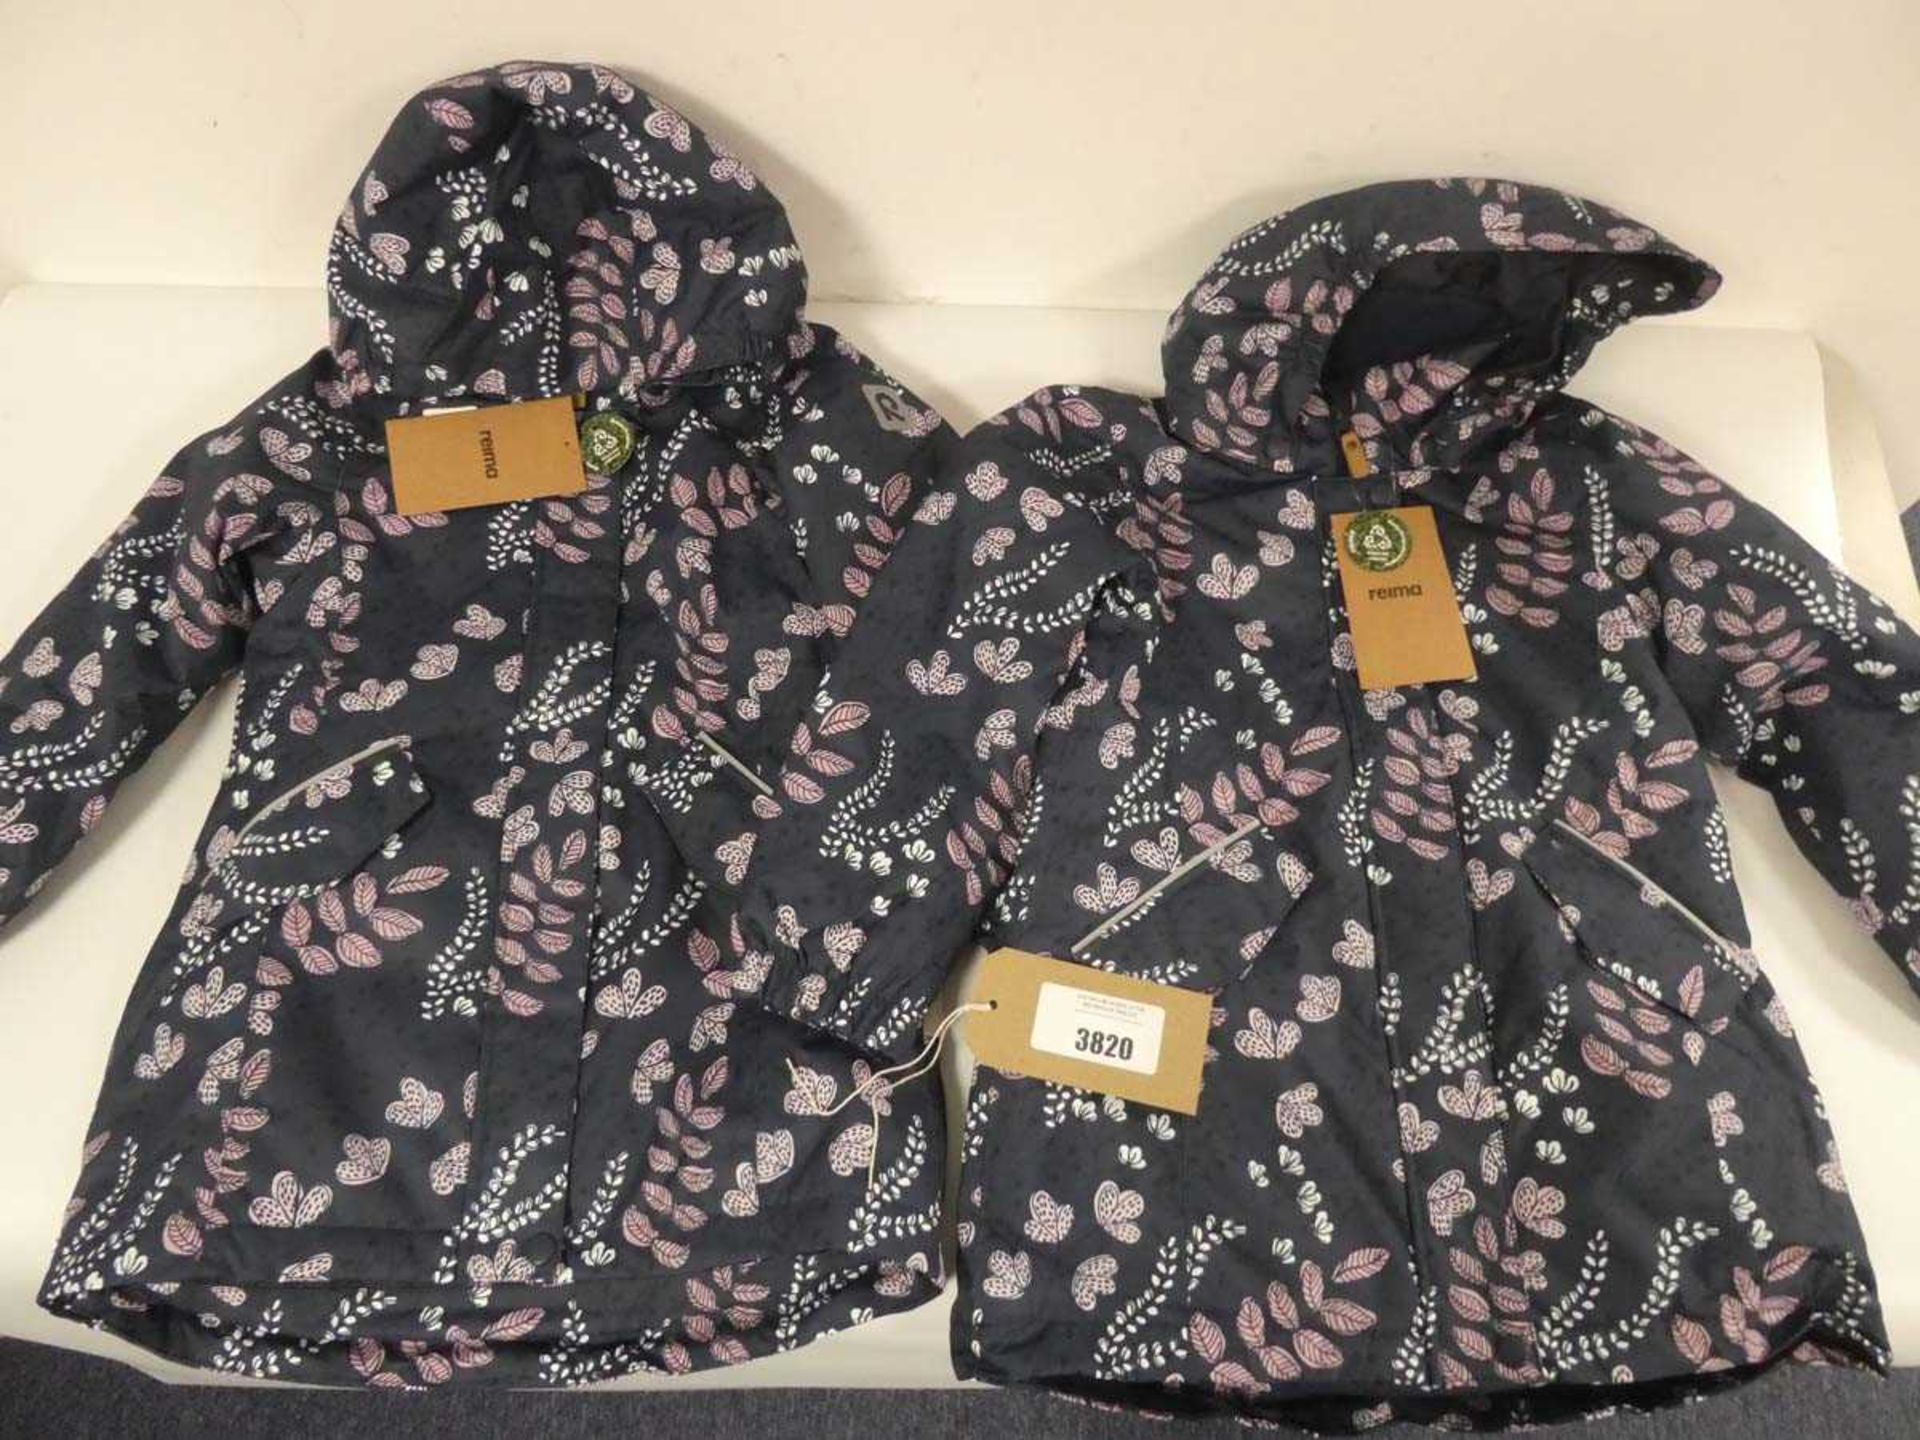 Two Reima girls winter Taho jackets in navy, size 116cm/6 years (bagged)